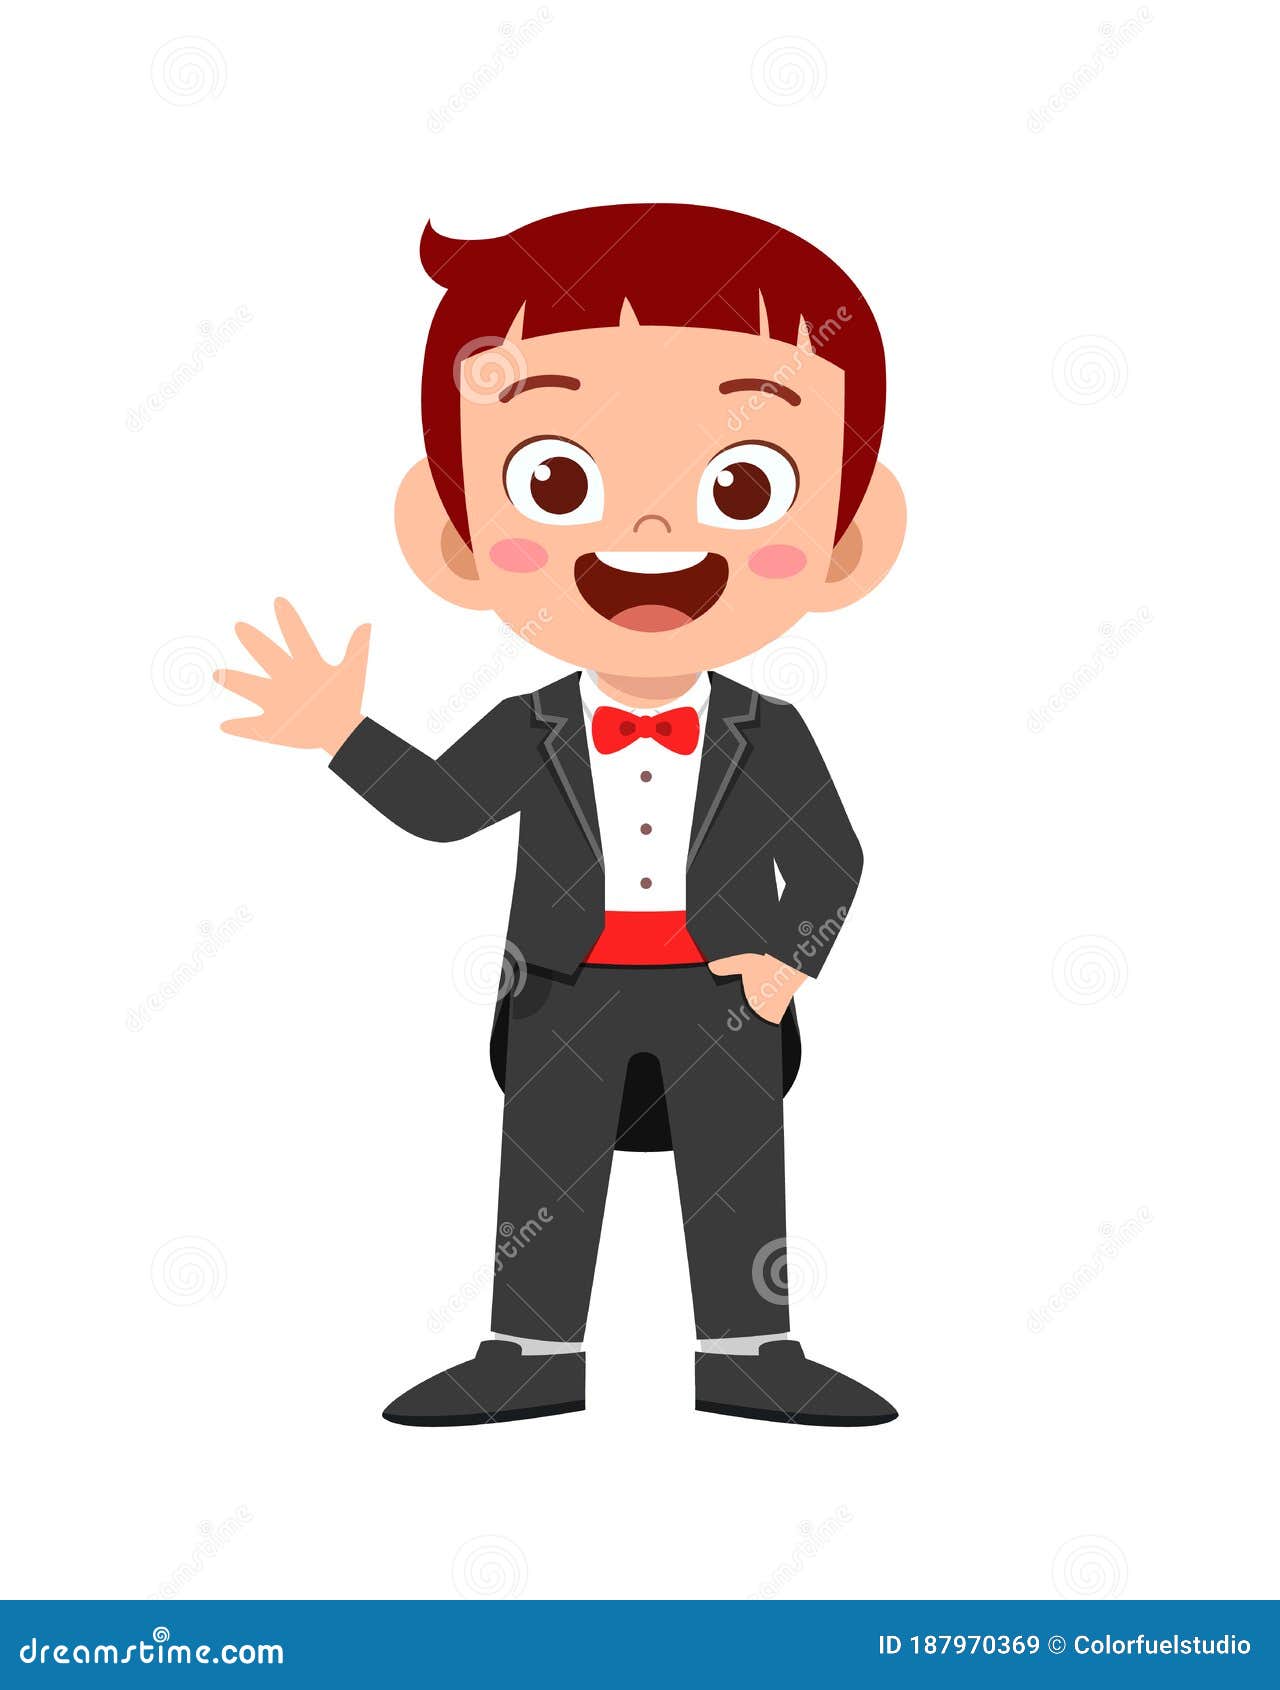 Occupation Clipart-actor in suit clipart